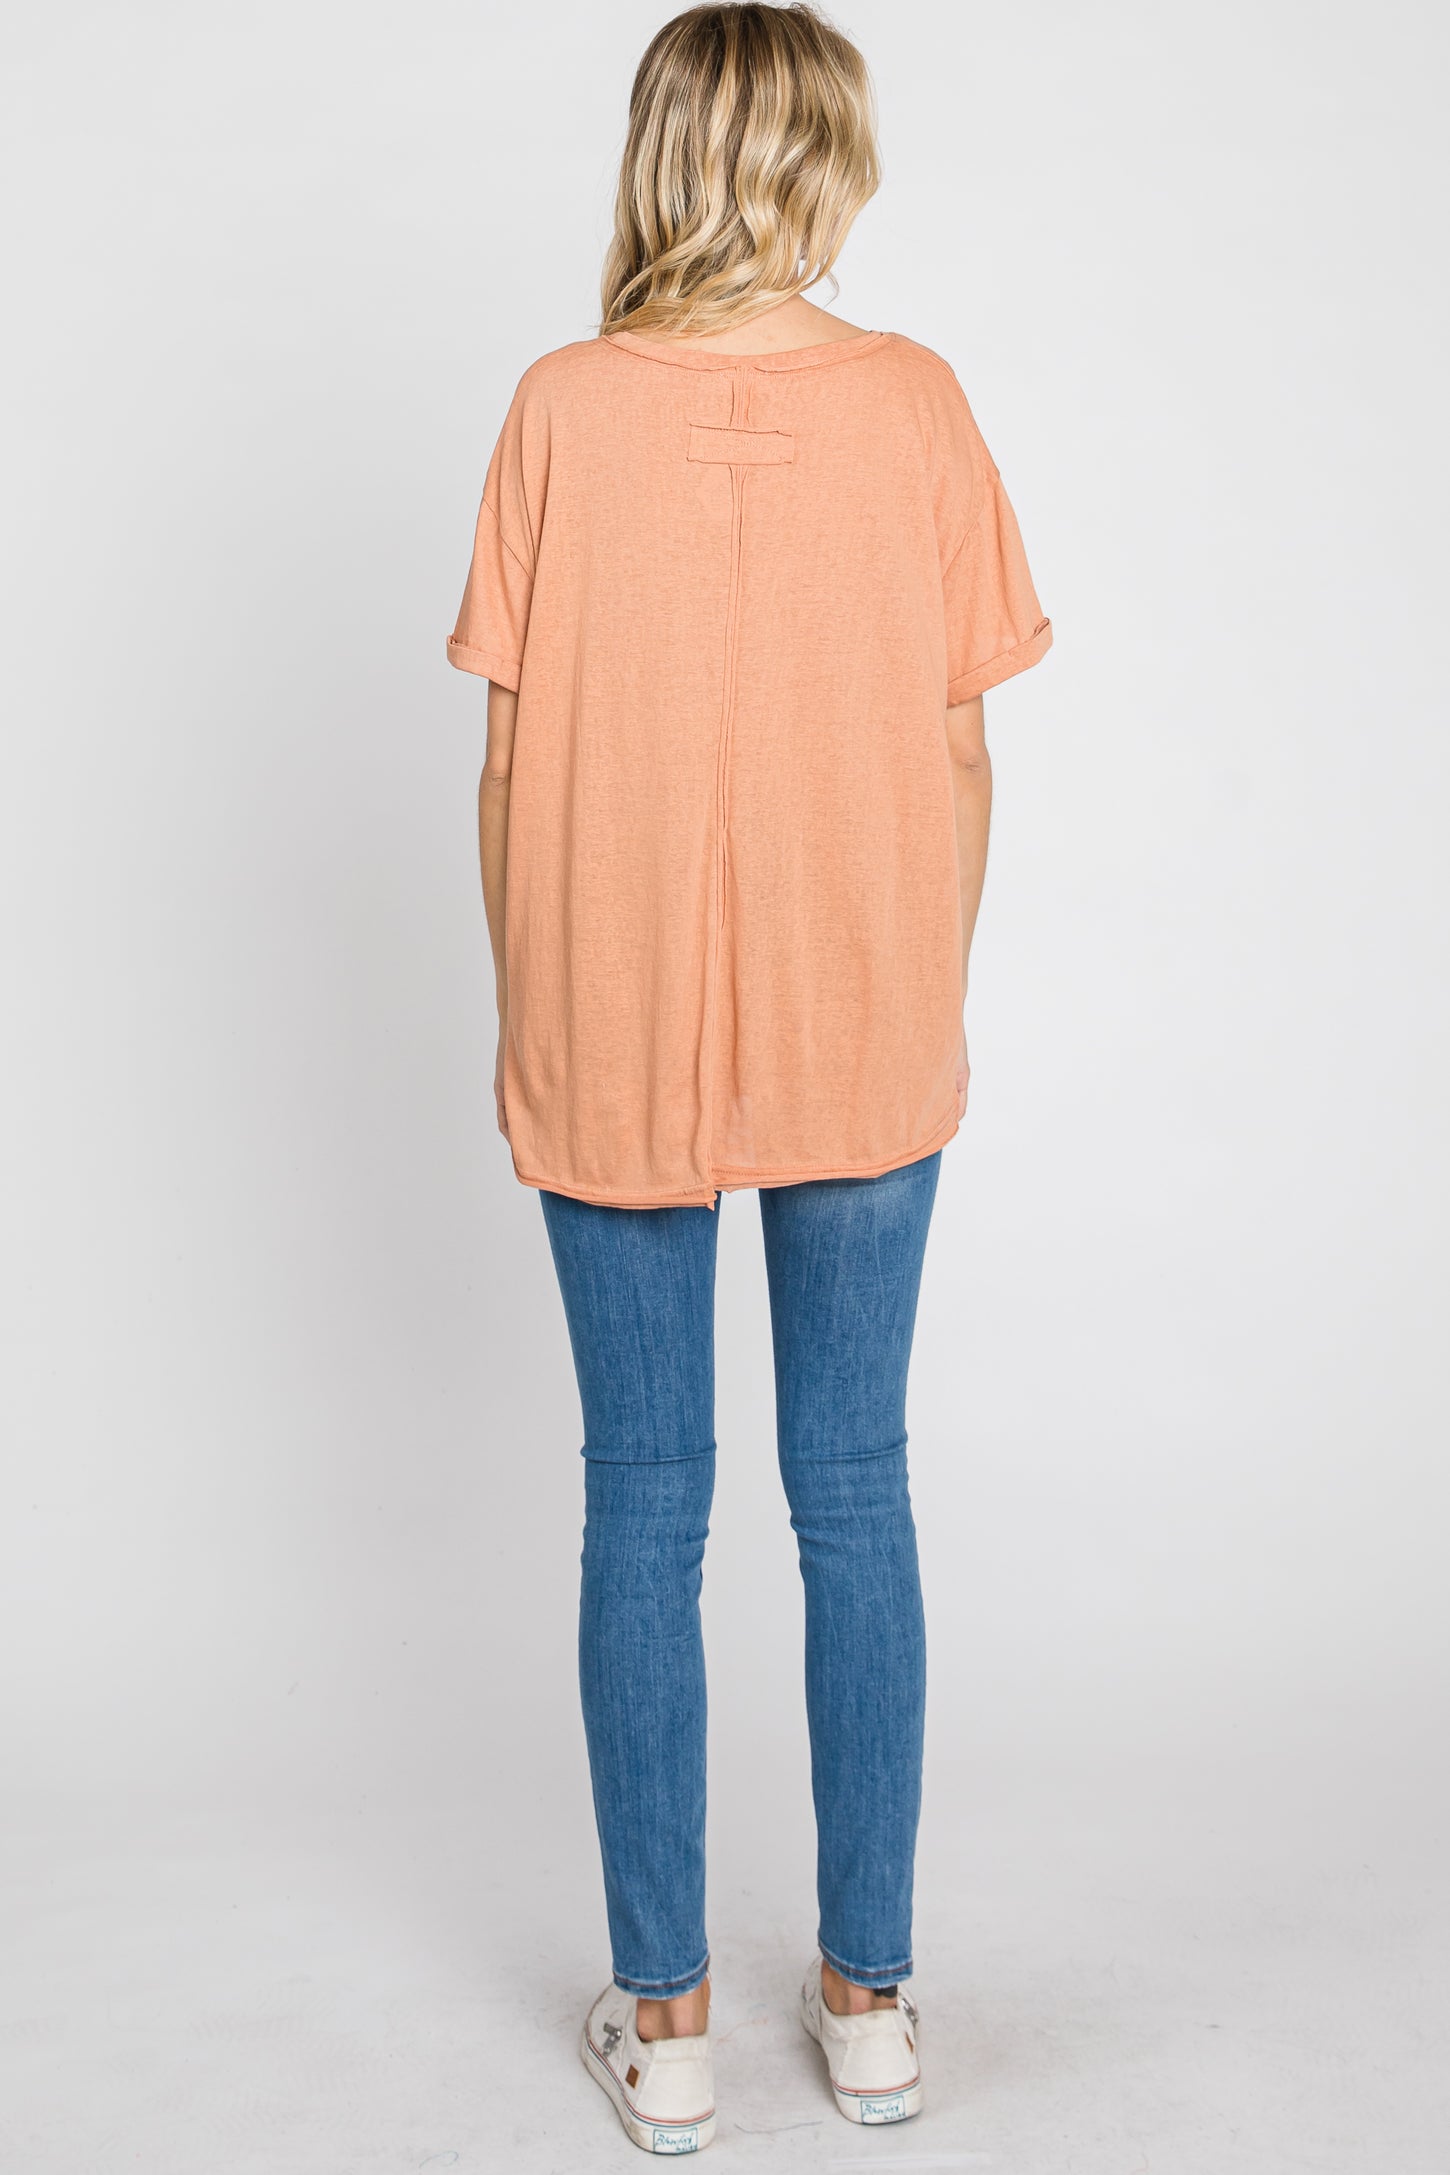 Rust Basic Rolled Short Sleeve Top